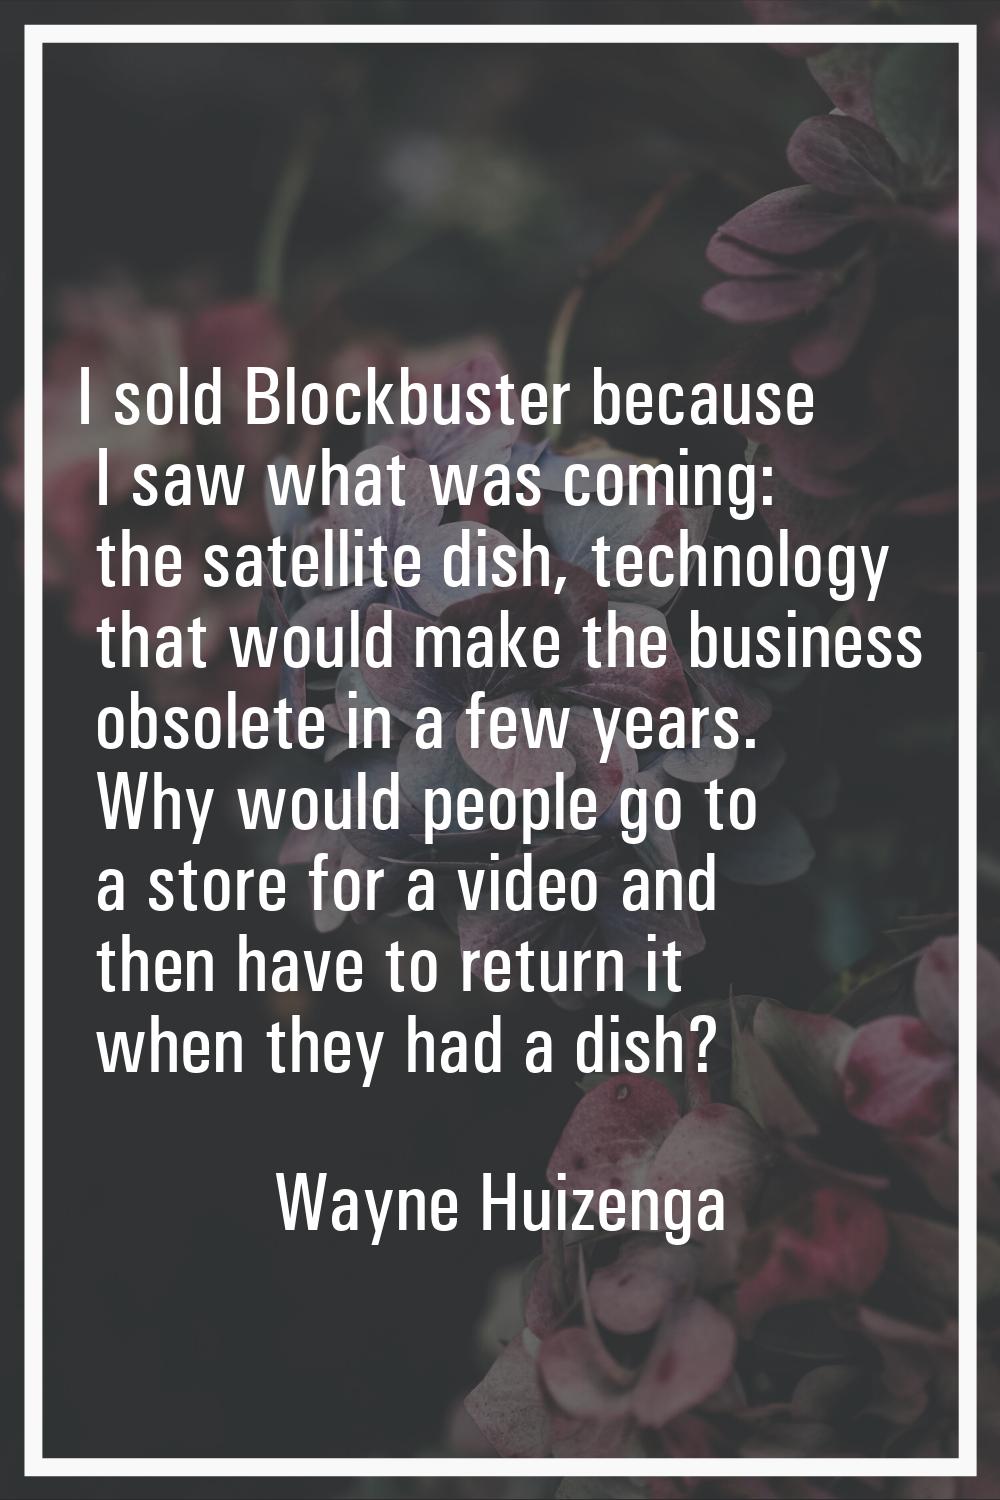 I sold Blockbuster because I saw what was coming: the satellite dish, technology that would make th